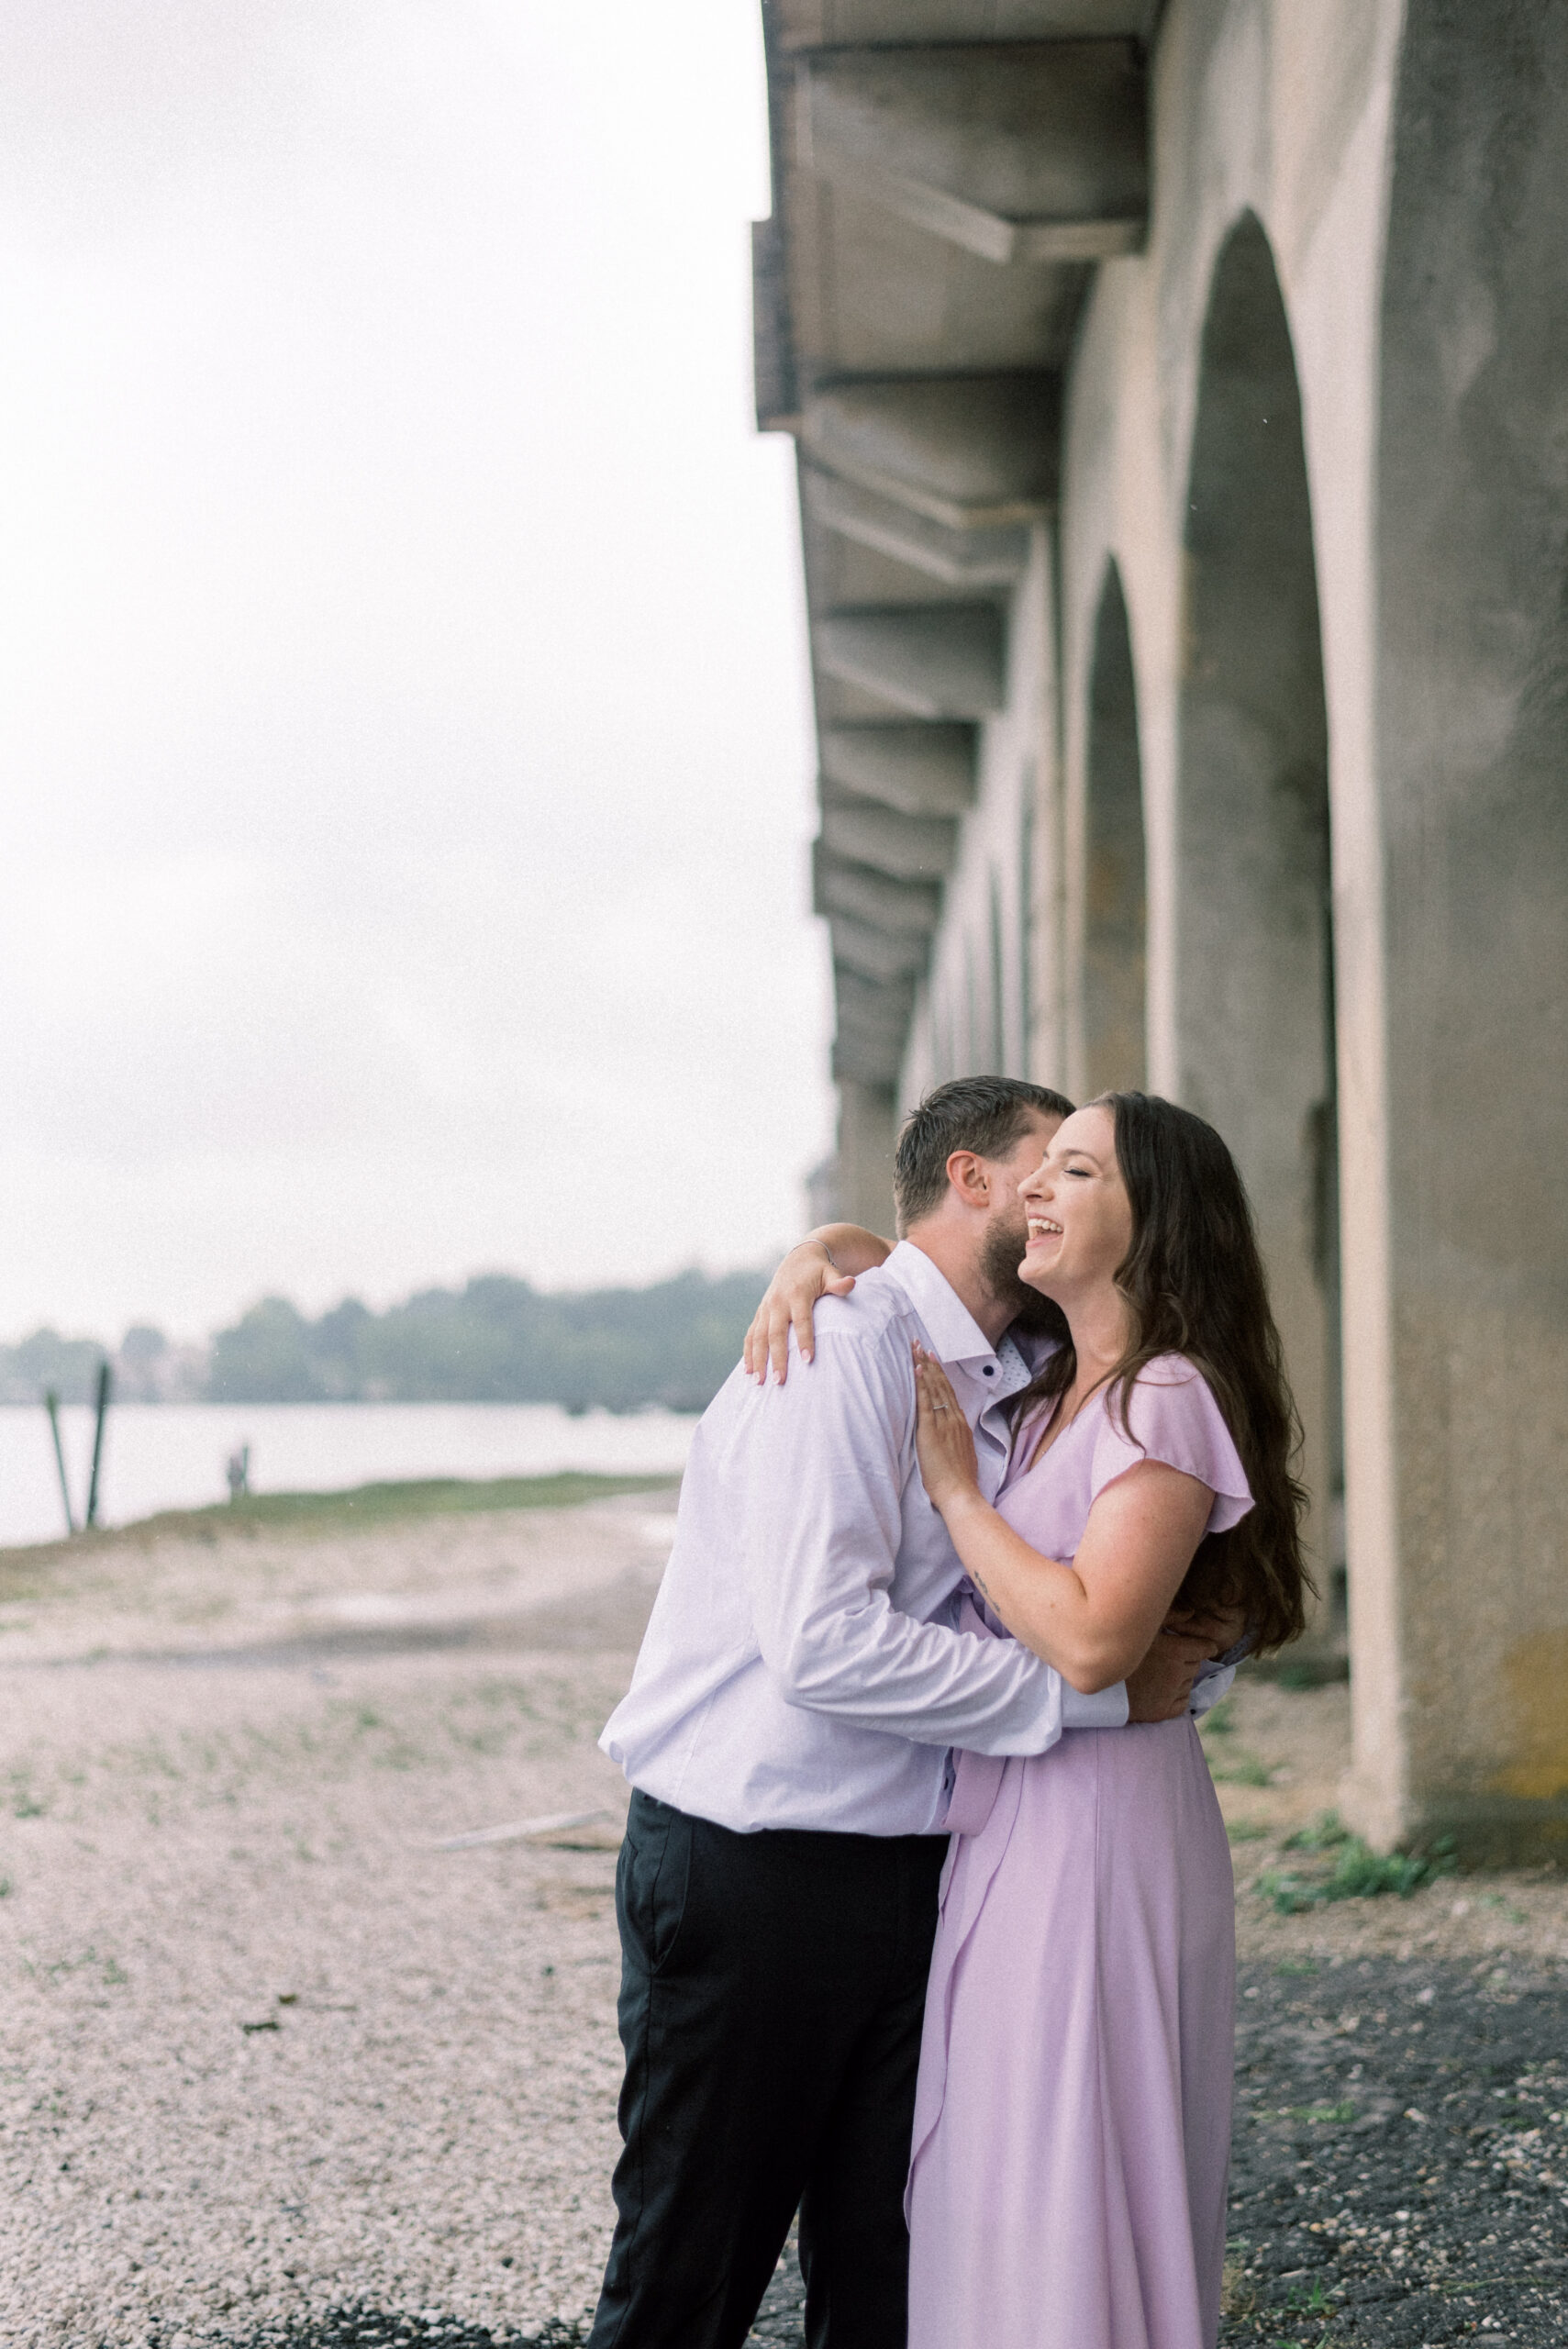 Pennsylvania wedding photographer captures man telling woman a secret and making her laugh